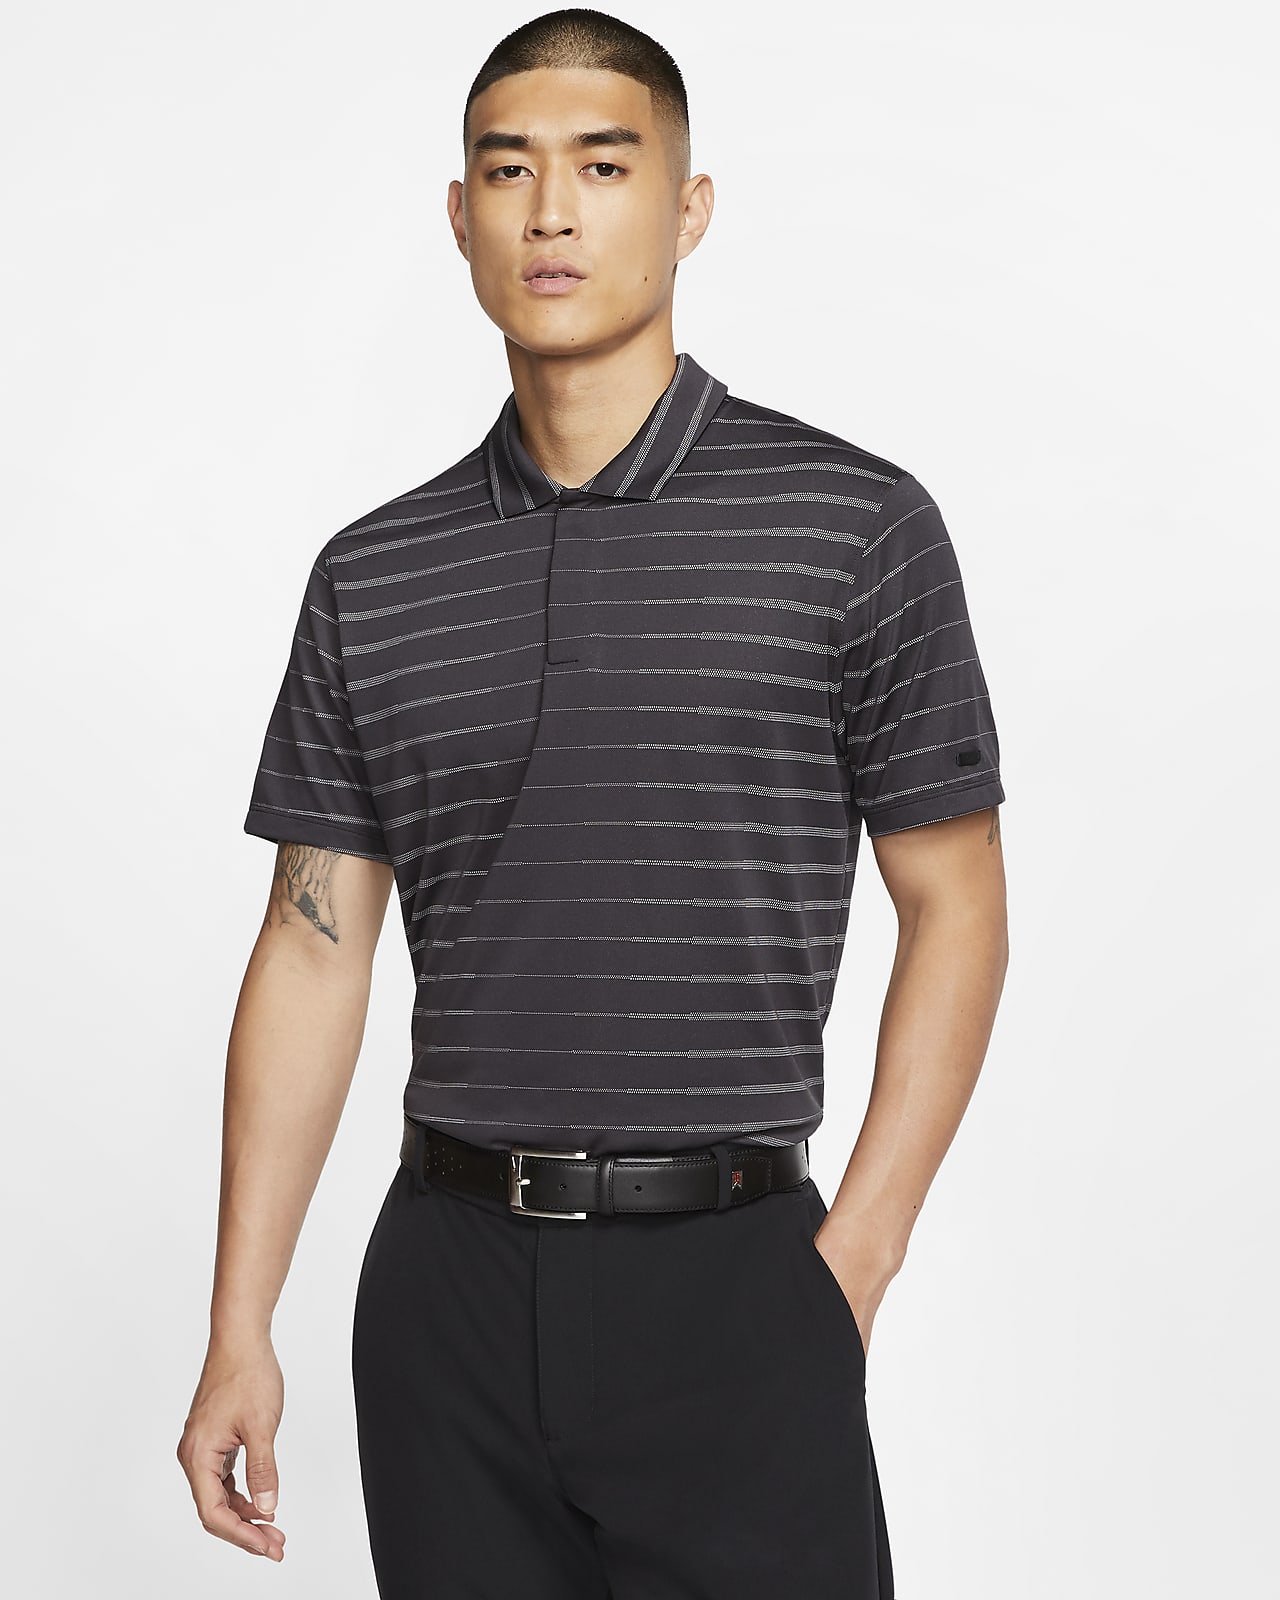 tiger woods sweater nike